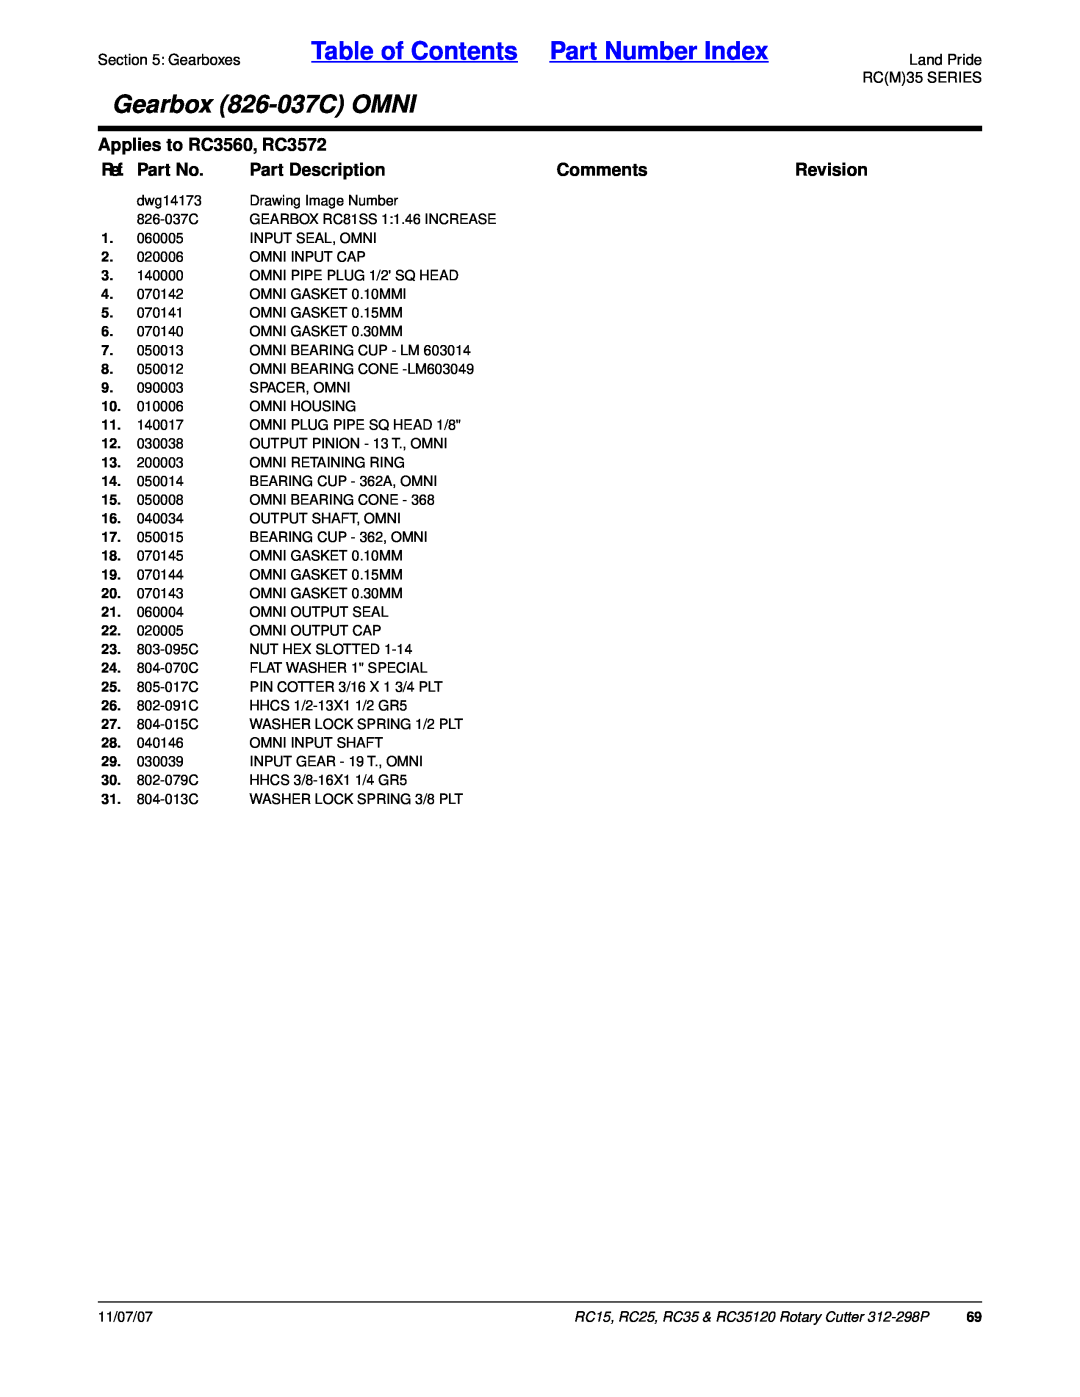 Land Pride Table of Contents Part Number Index, Gearbox 826-037COMNI, Applies to RC3560, RC3572, Ref. Part No, Comments 